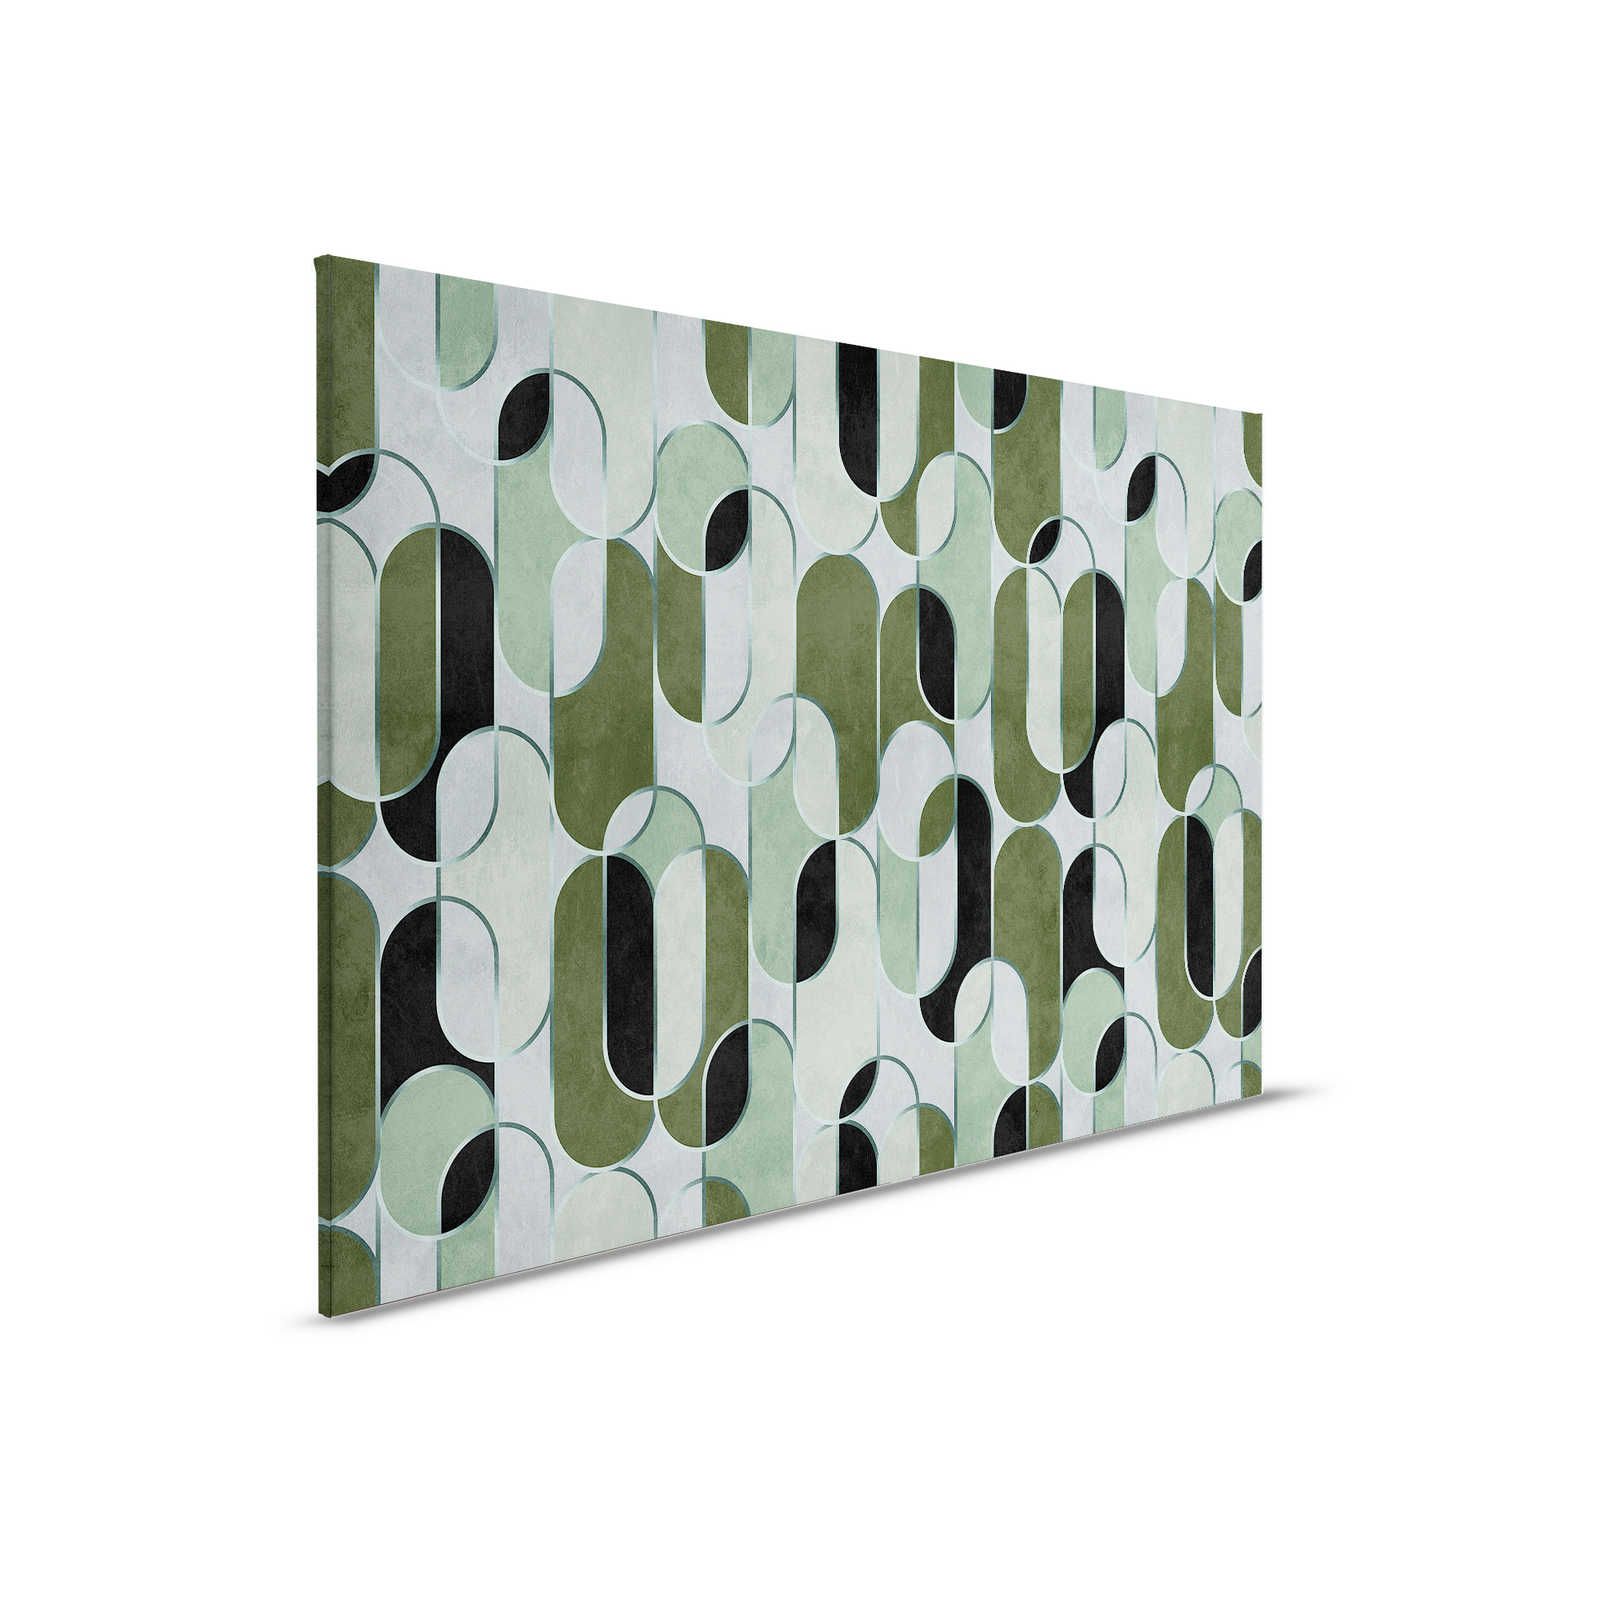         Ritz 4 - Green Canvas Painting 50s Retro Décor with Silver Accent - 0.90 m x 0.60 m
    